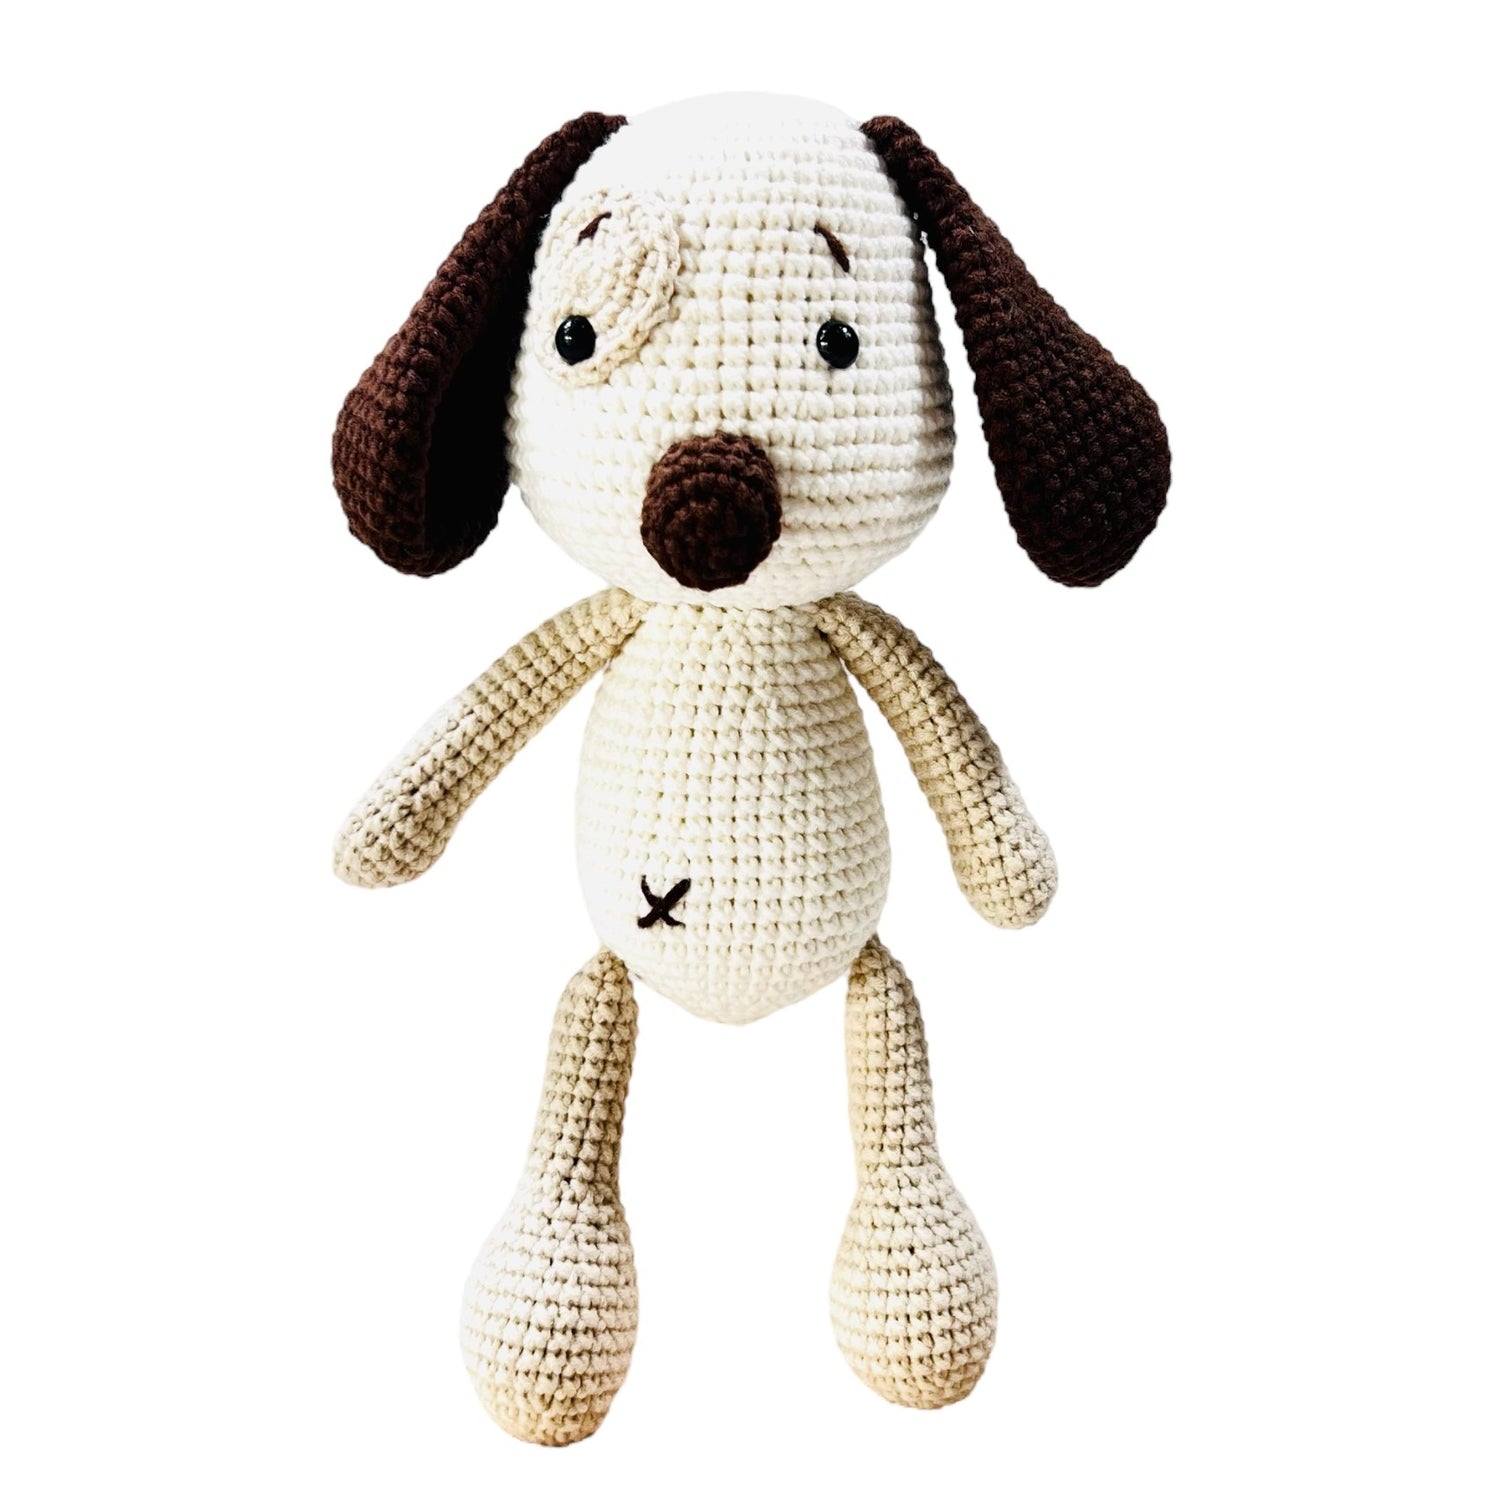 Crocheted Animal Doll - Pedro, the Puppy